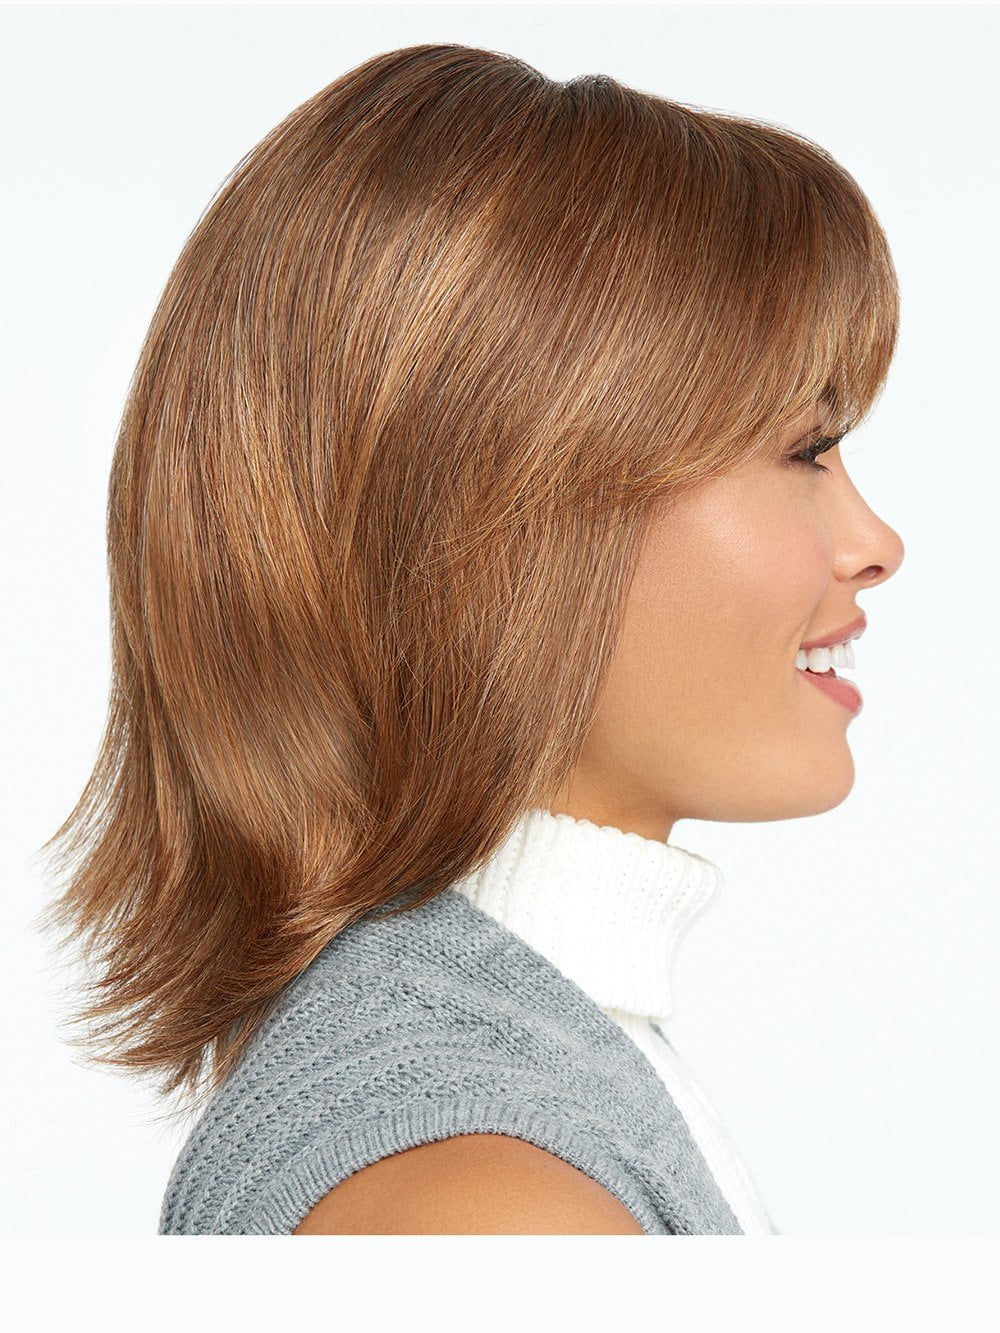 Featuring razor tapered bangs that blend into long razor-cut layers in the sides and back